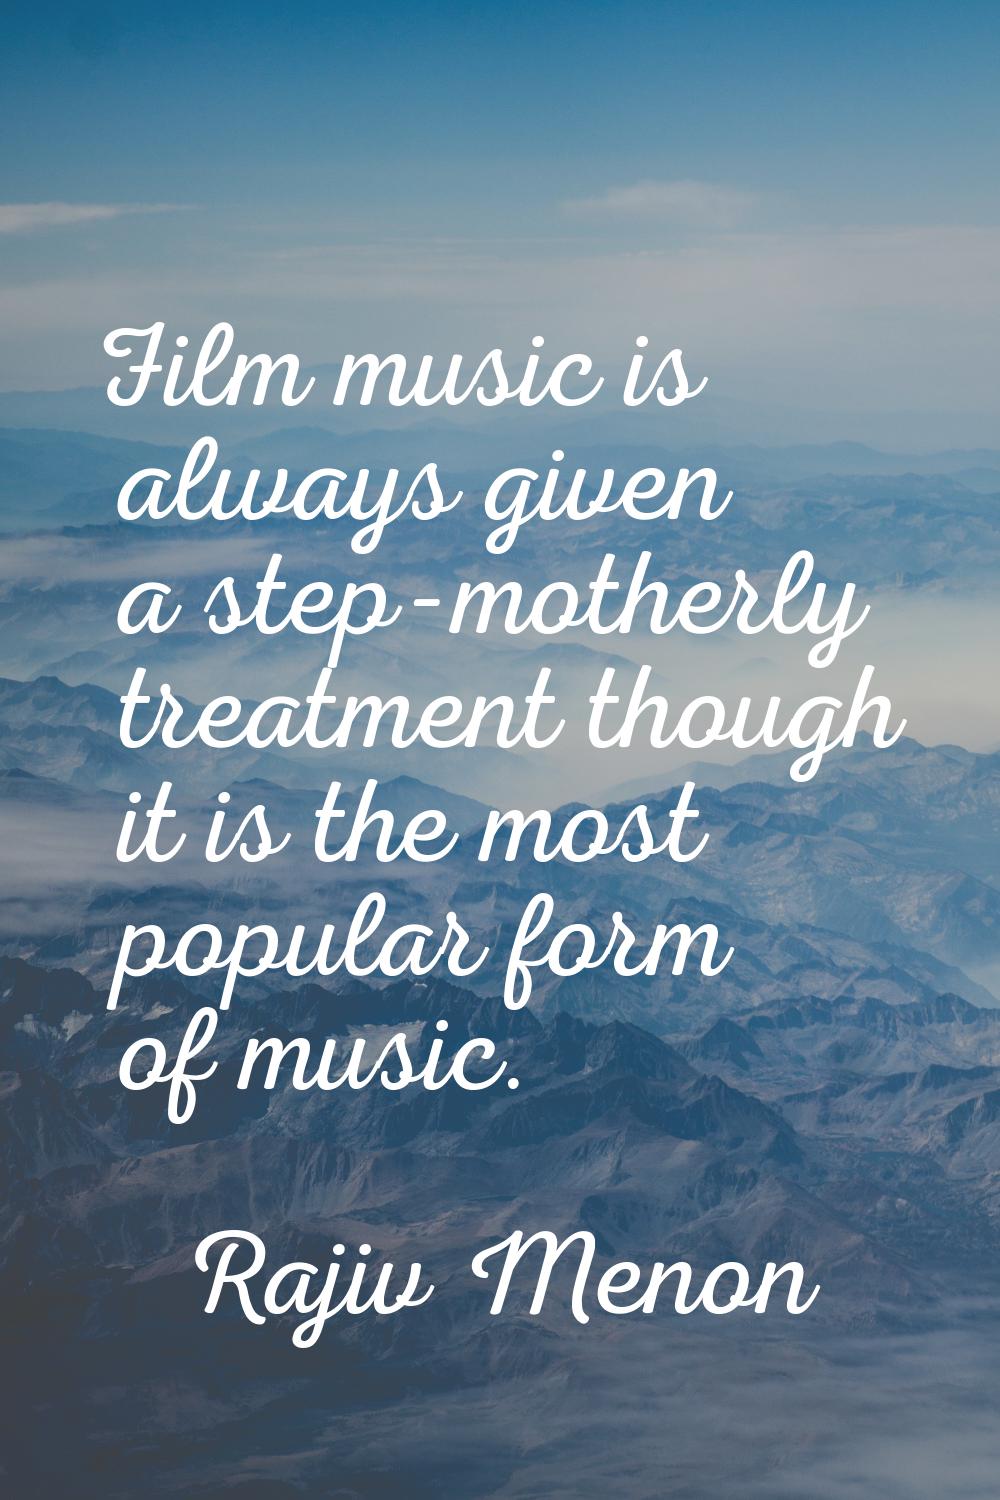 Film music is always given a step-motherly treatment though it is the most popular form of music.